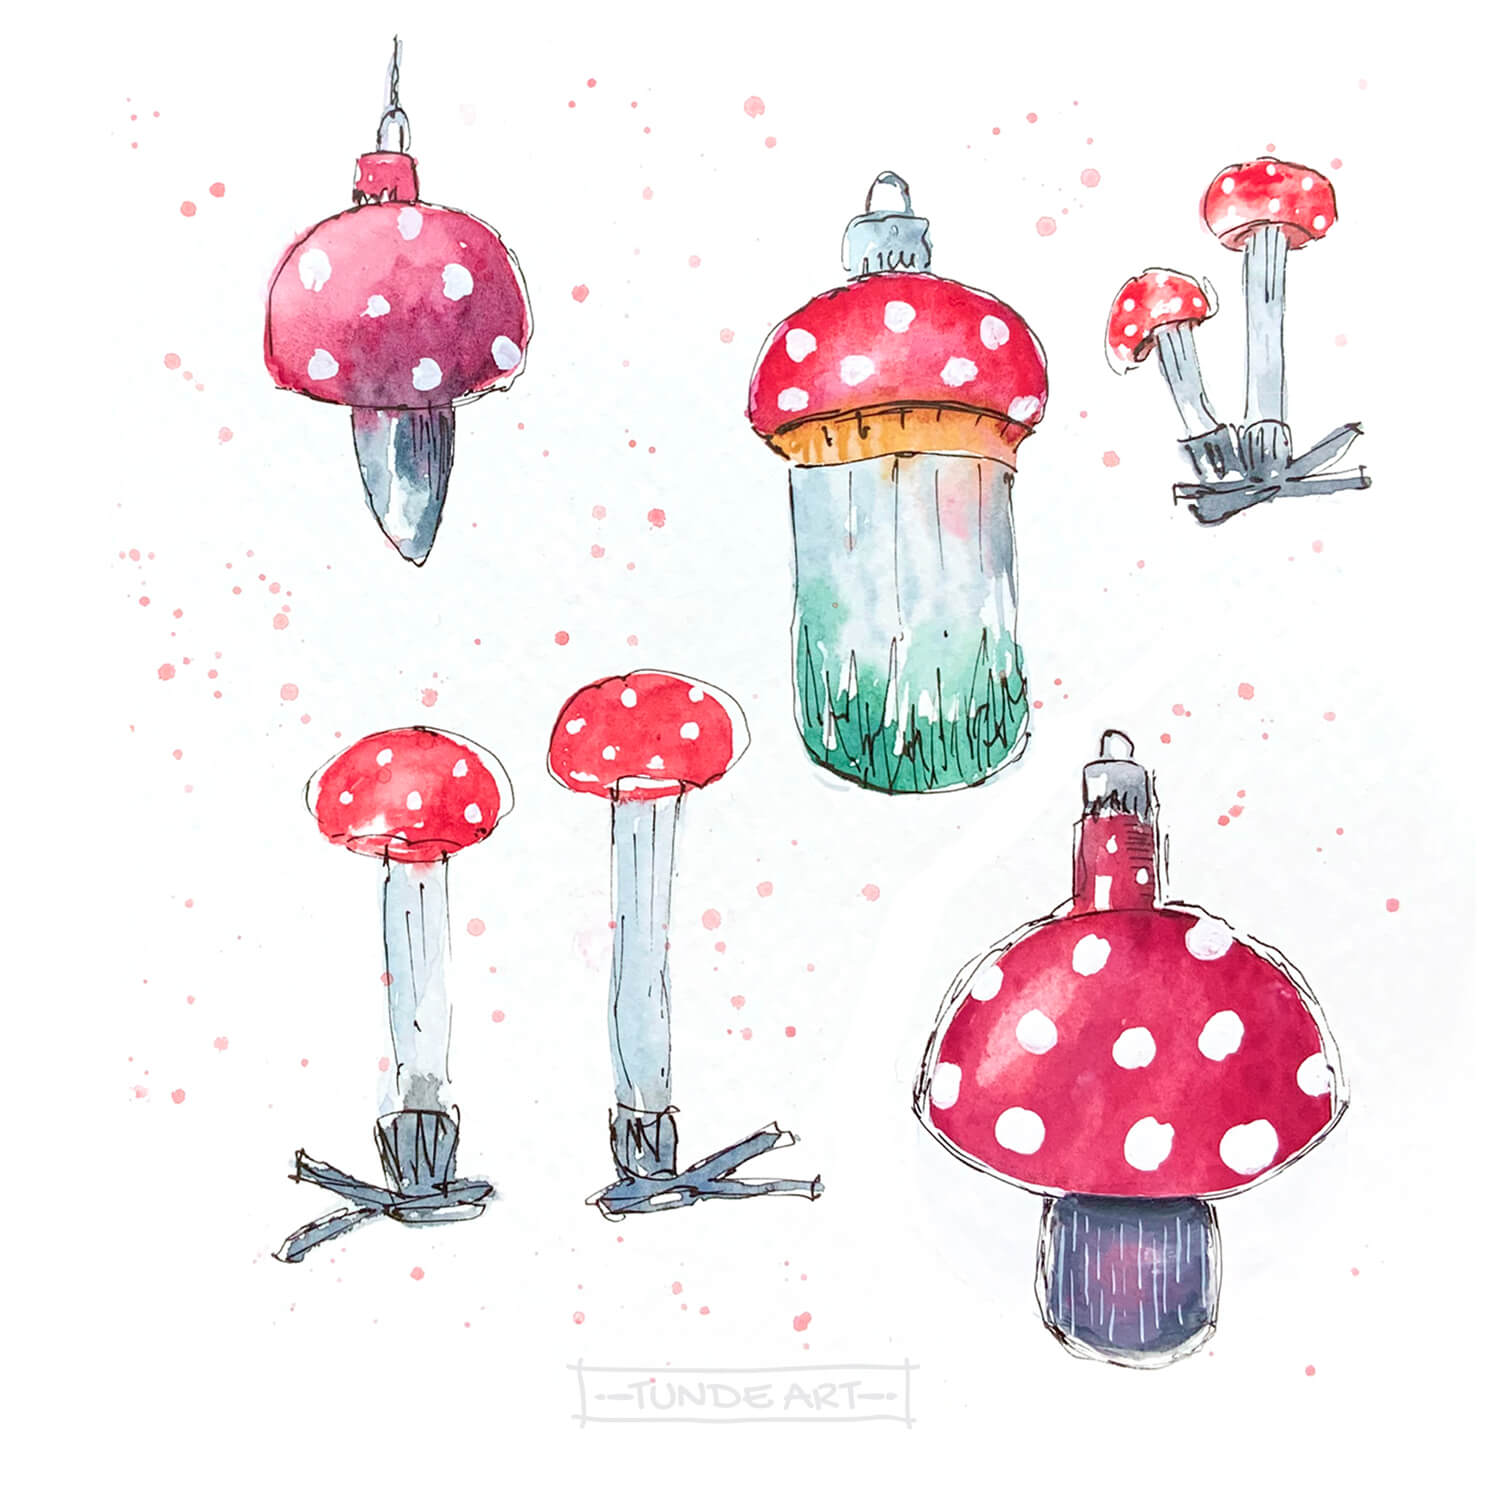 Quick sketch of vintage mushroom ornaments by Tunde Szentes